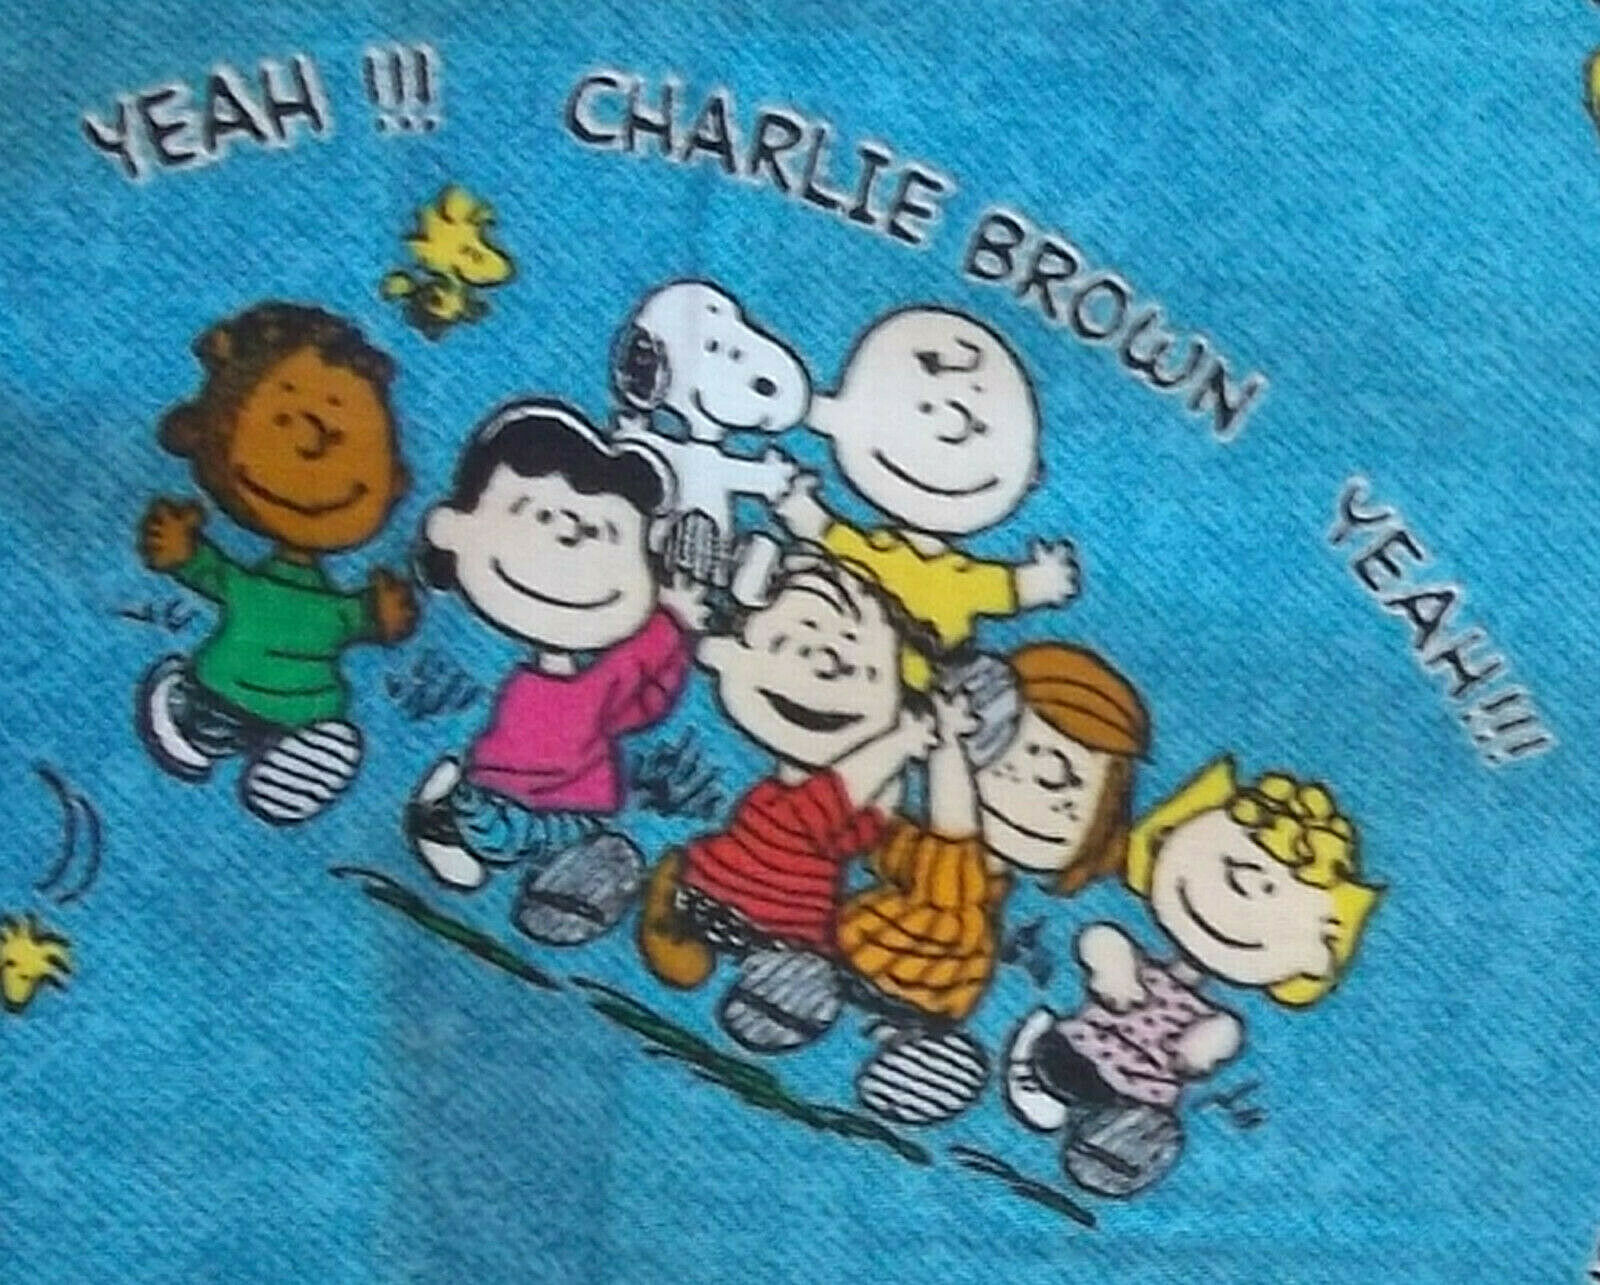 3 Yards Hurray for Charlie Brown Fabric Springs 2006 Denim Background Franklin - $29.69